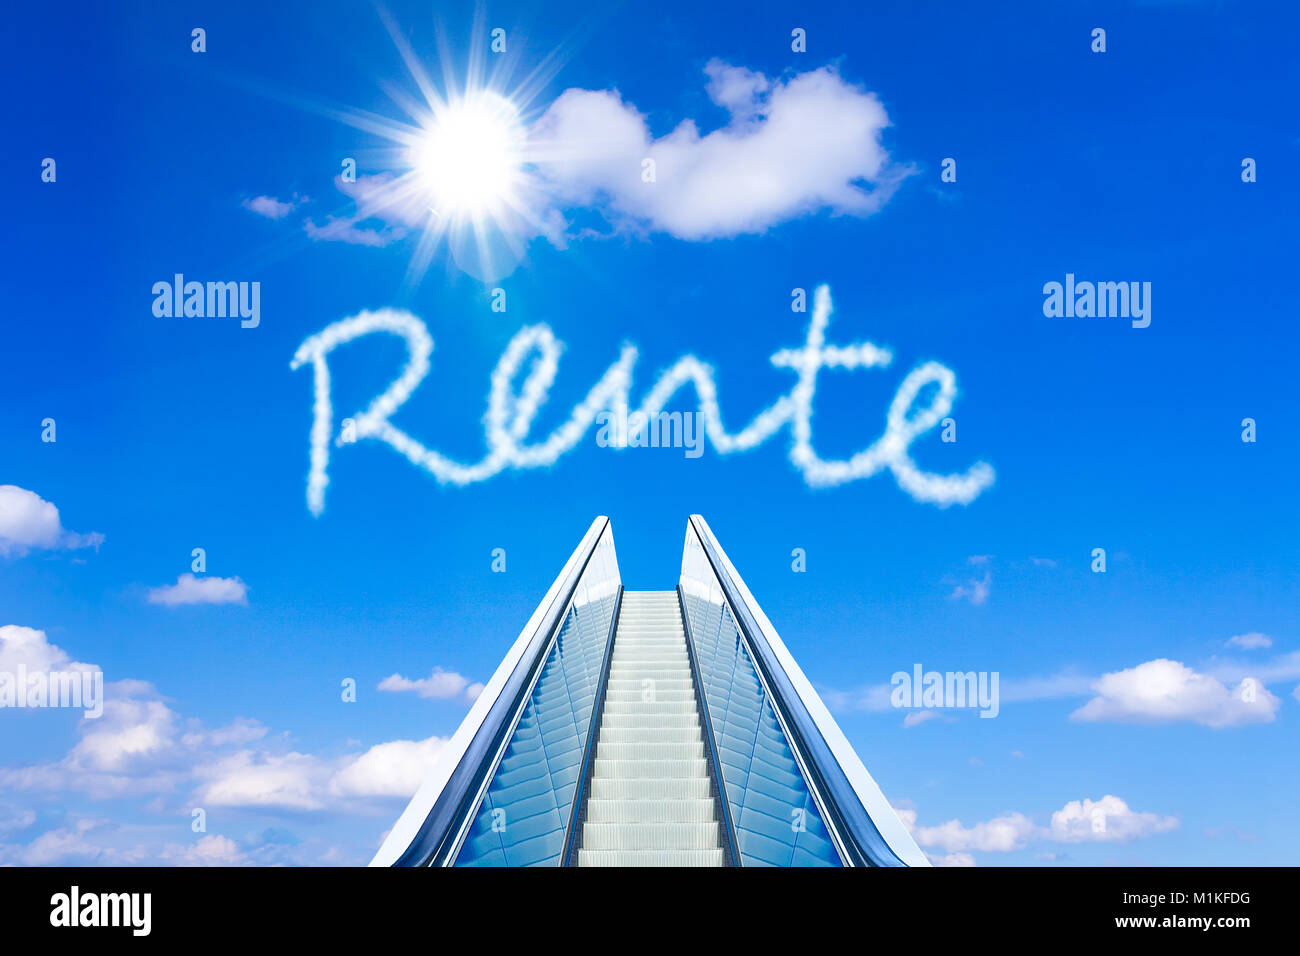 Escalator into a blue sky, concept of achievement, german text RENTE, meaning retirement or pension Stock Photo